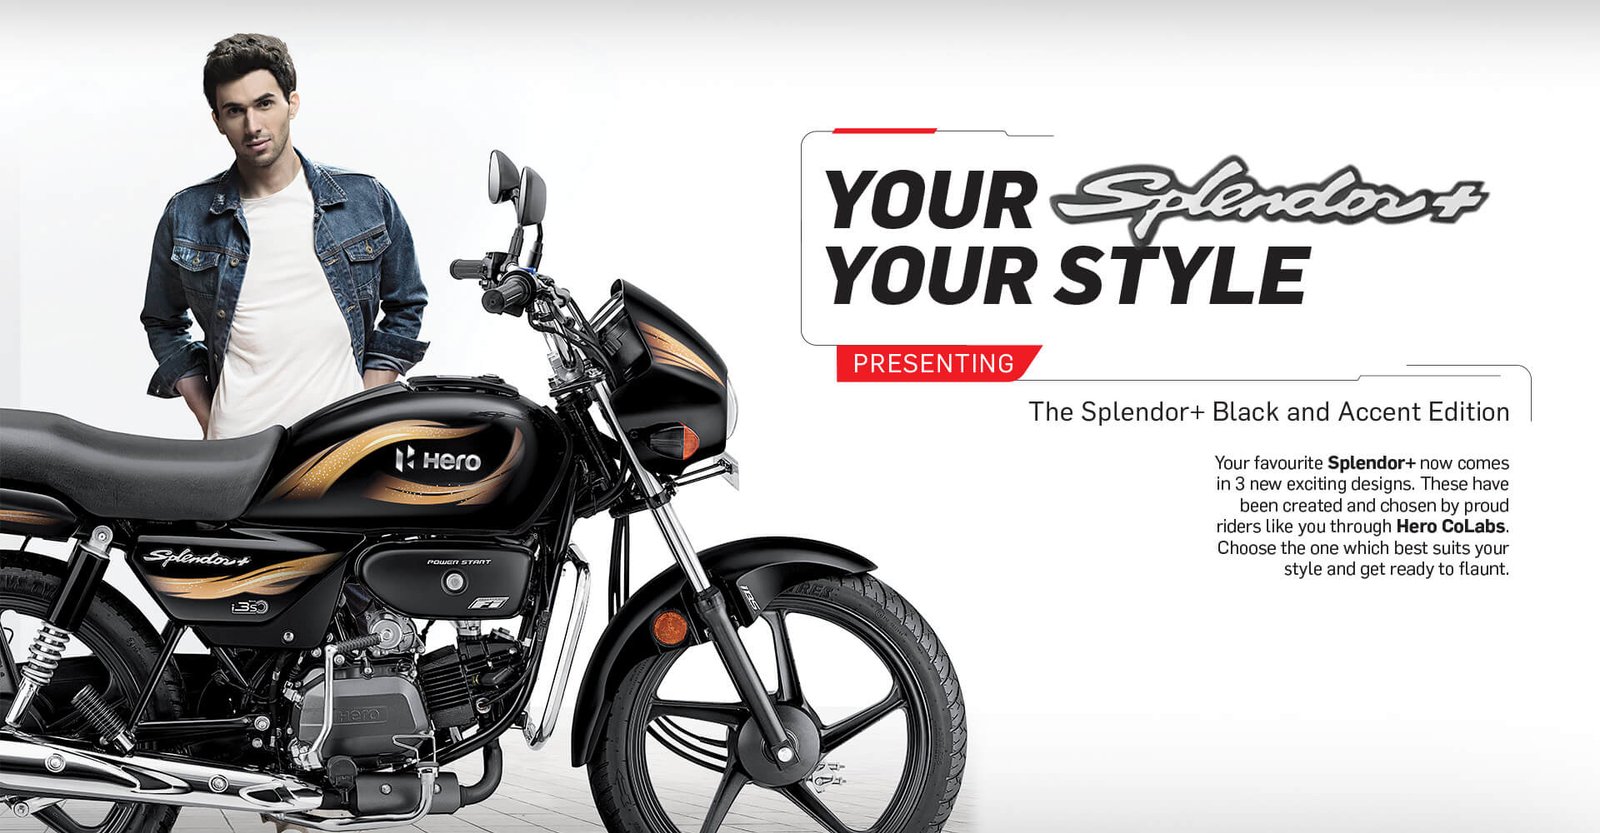 Know more about New Hero Splendor